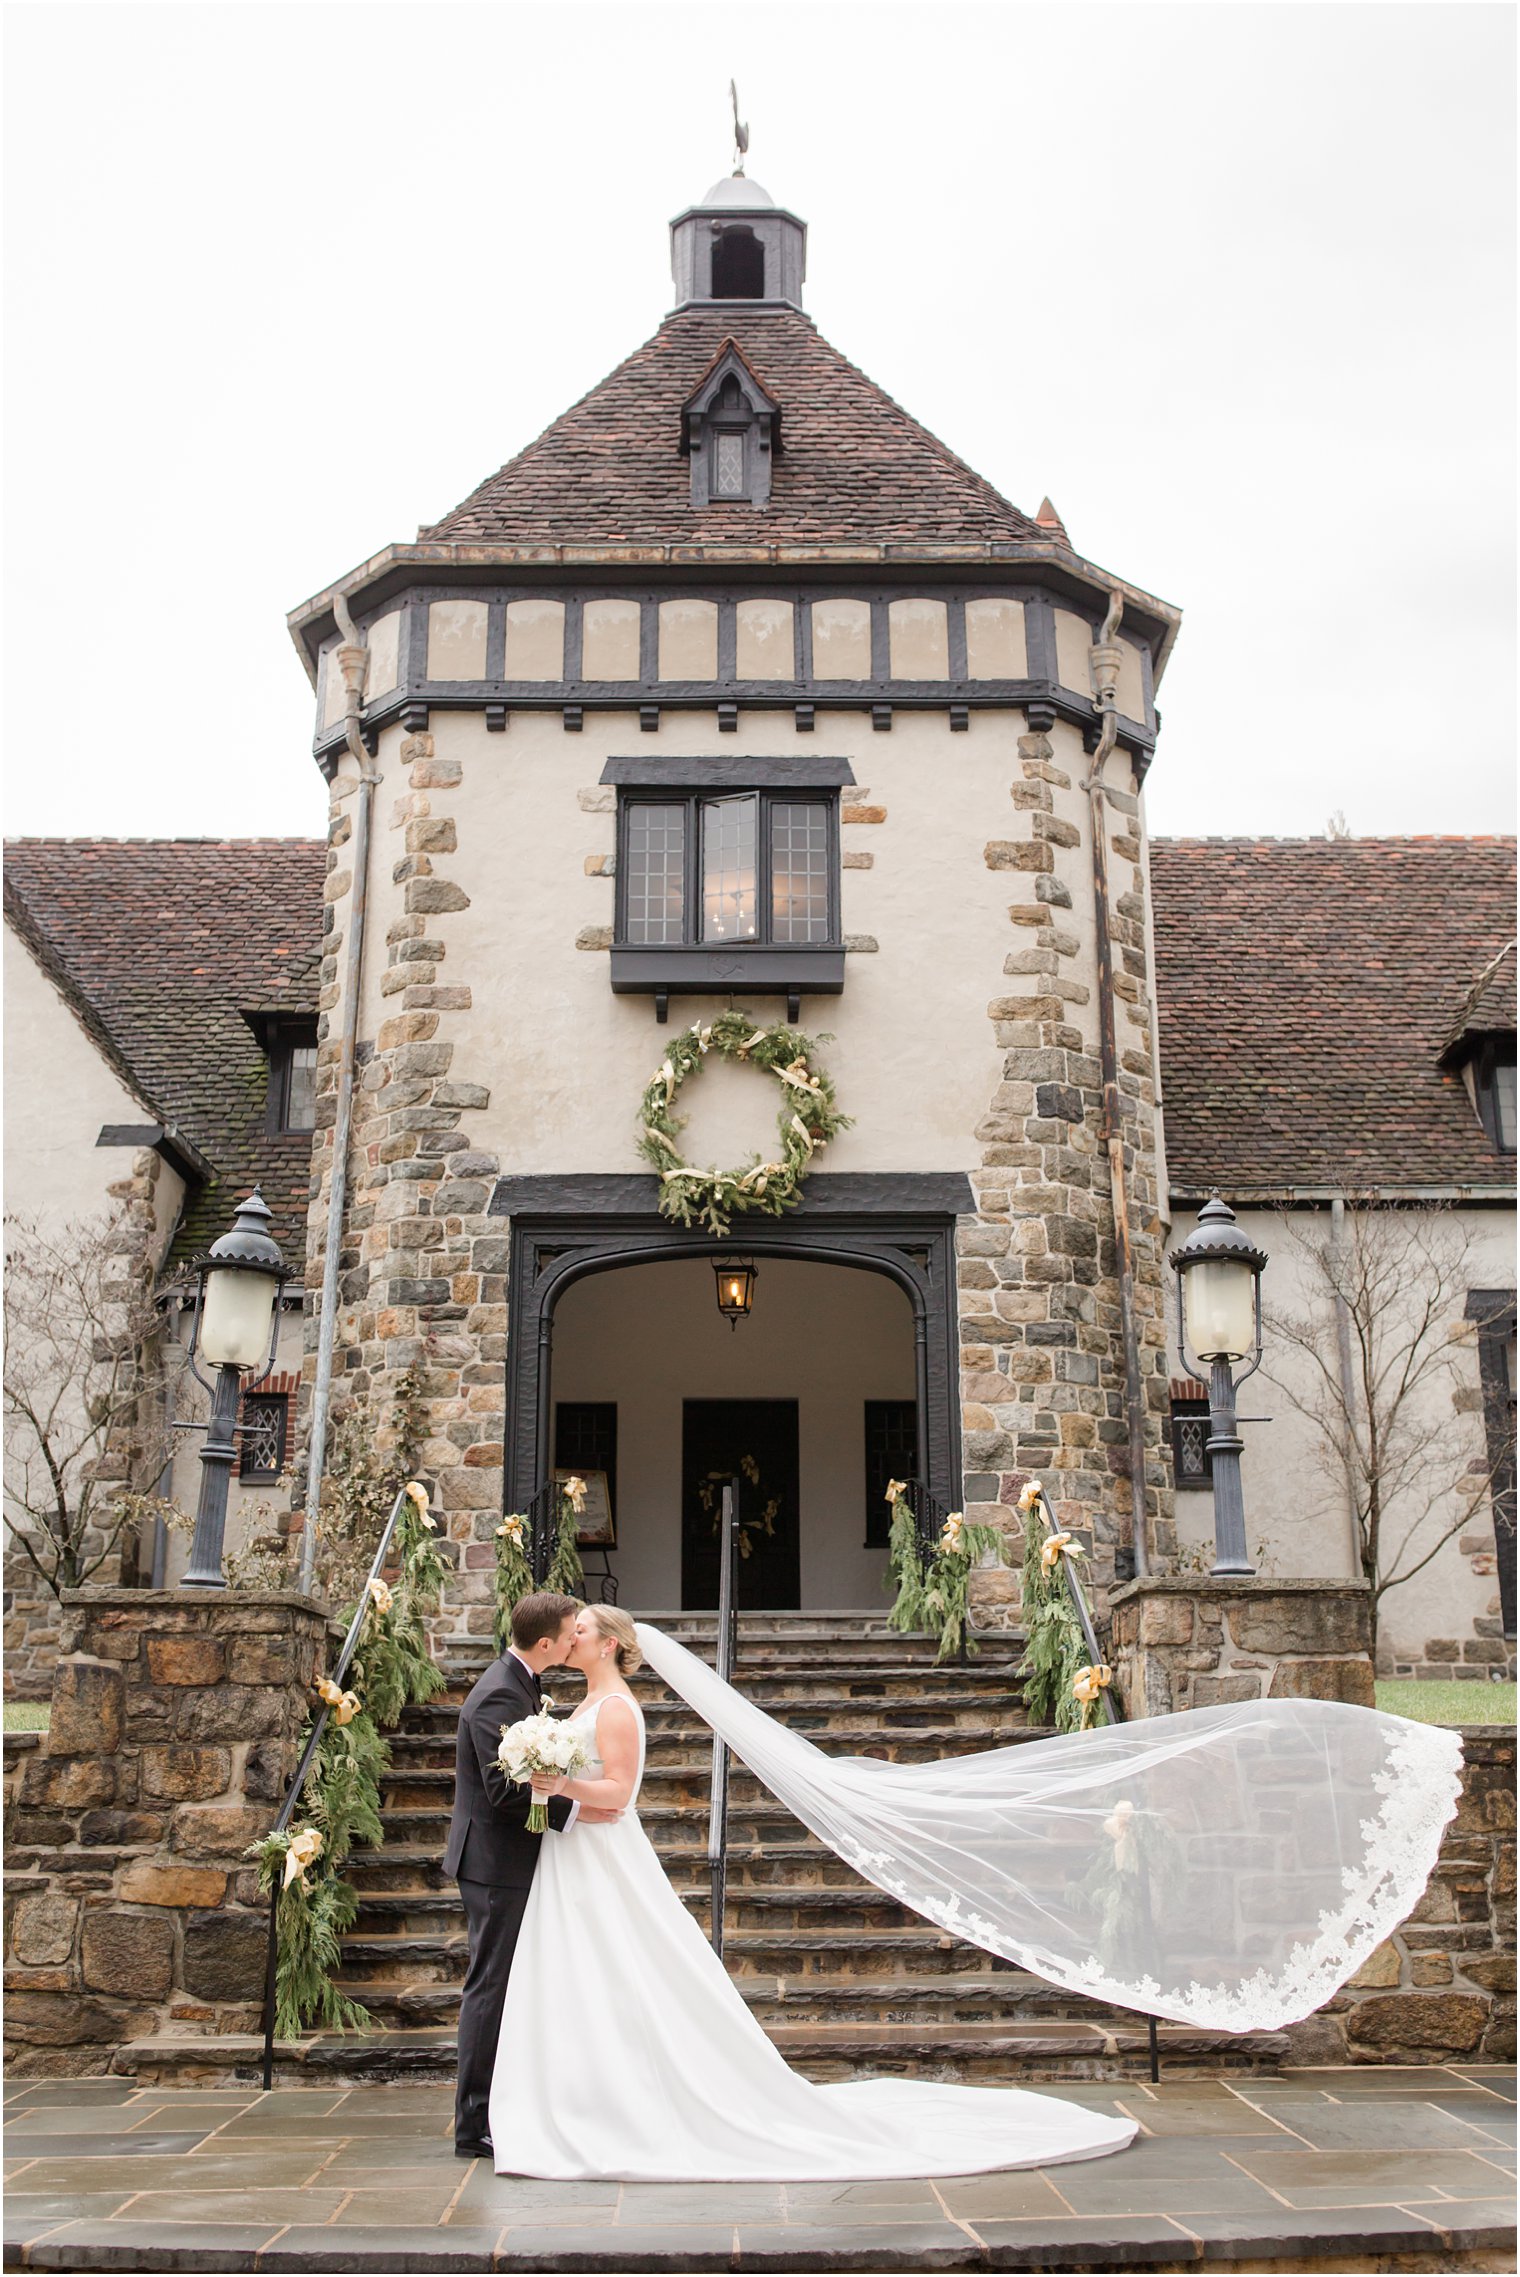 Bride and groom during winter wedding at Pleasantdale Chateau